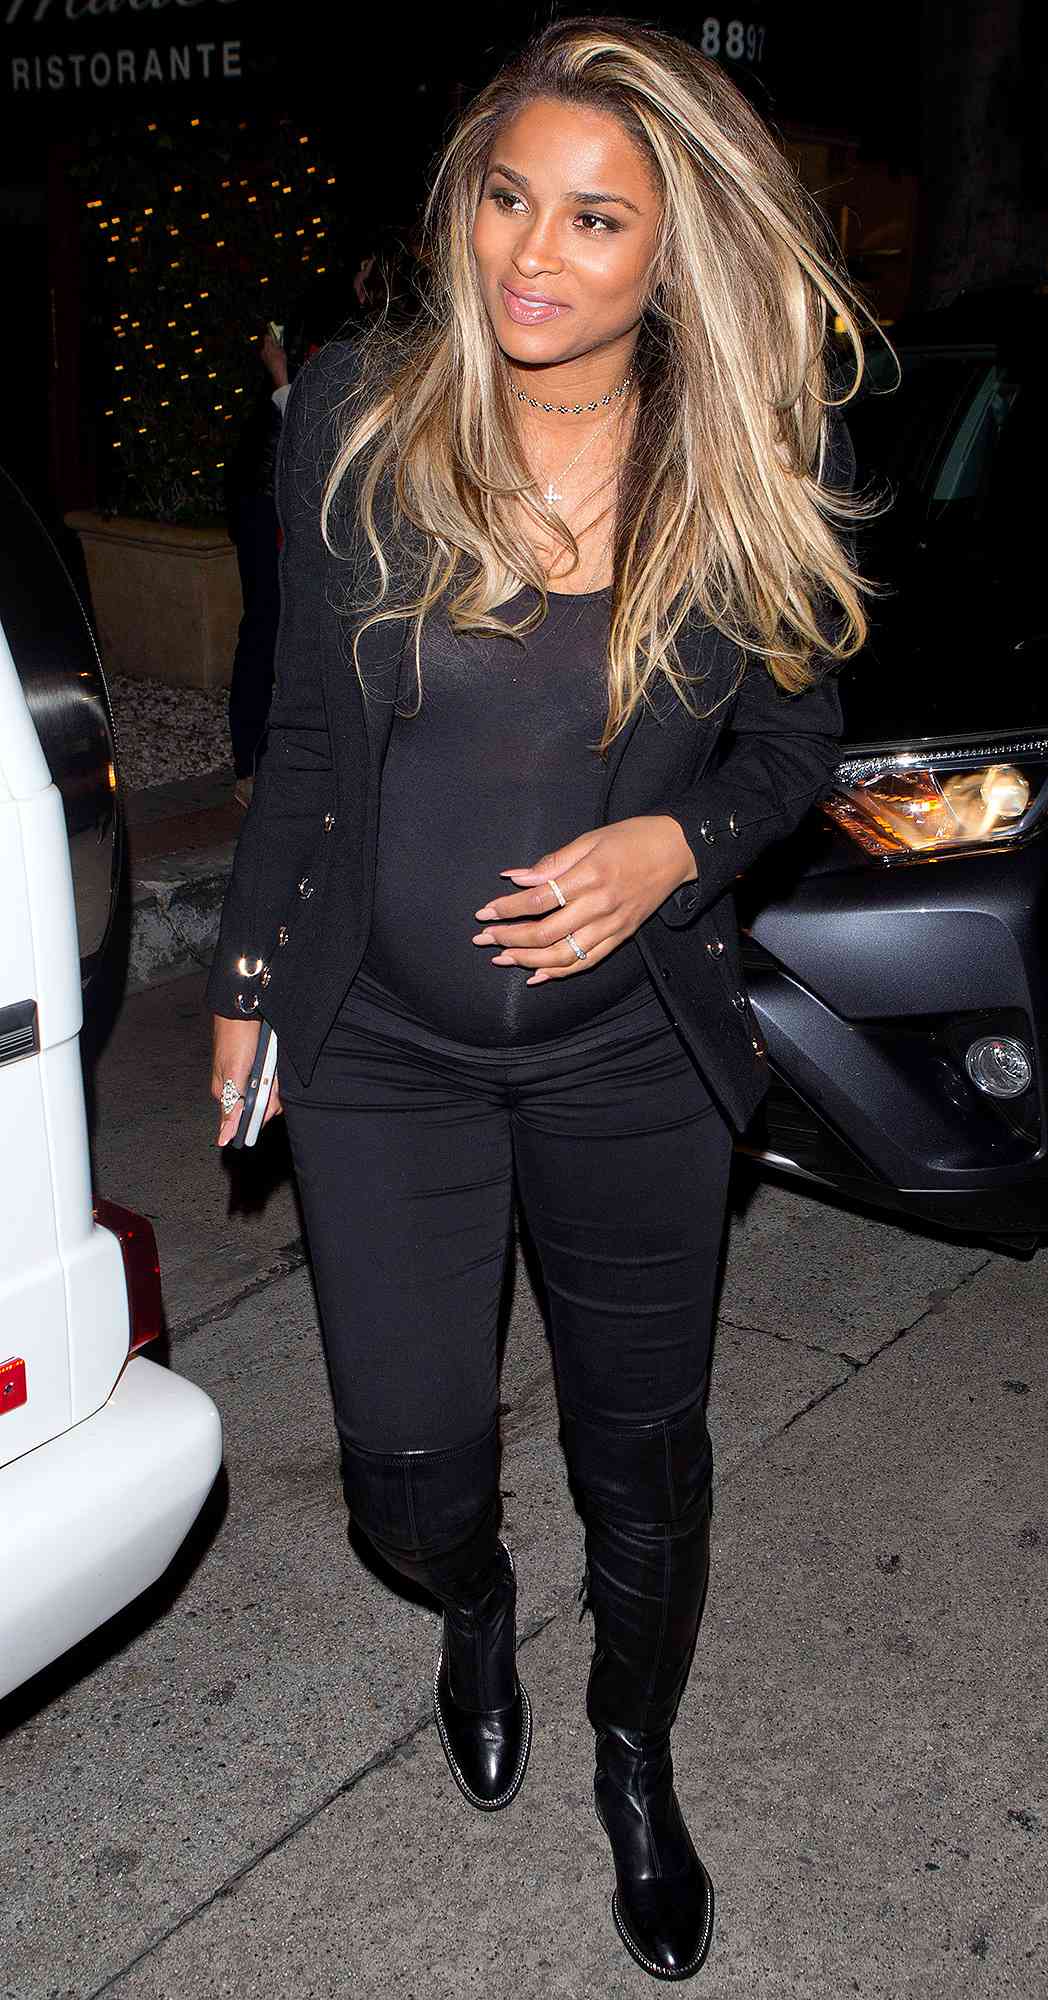 EXCLUSIVE: Ciara shows off her burgeoning baby bump as she leaves 'Madeo' Italian Restaurant with friends in West Hollywood, CA